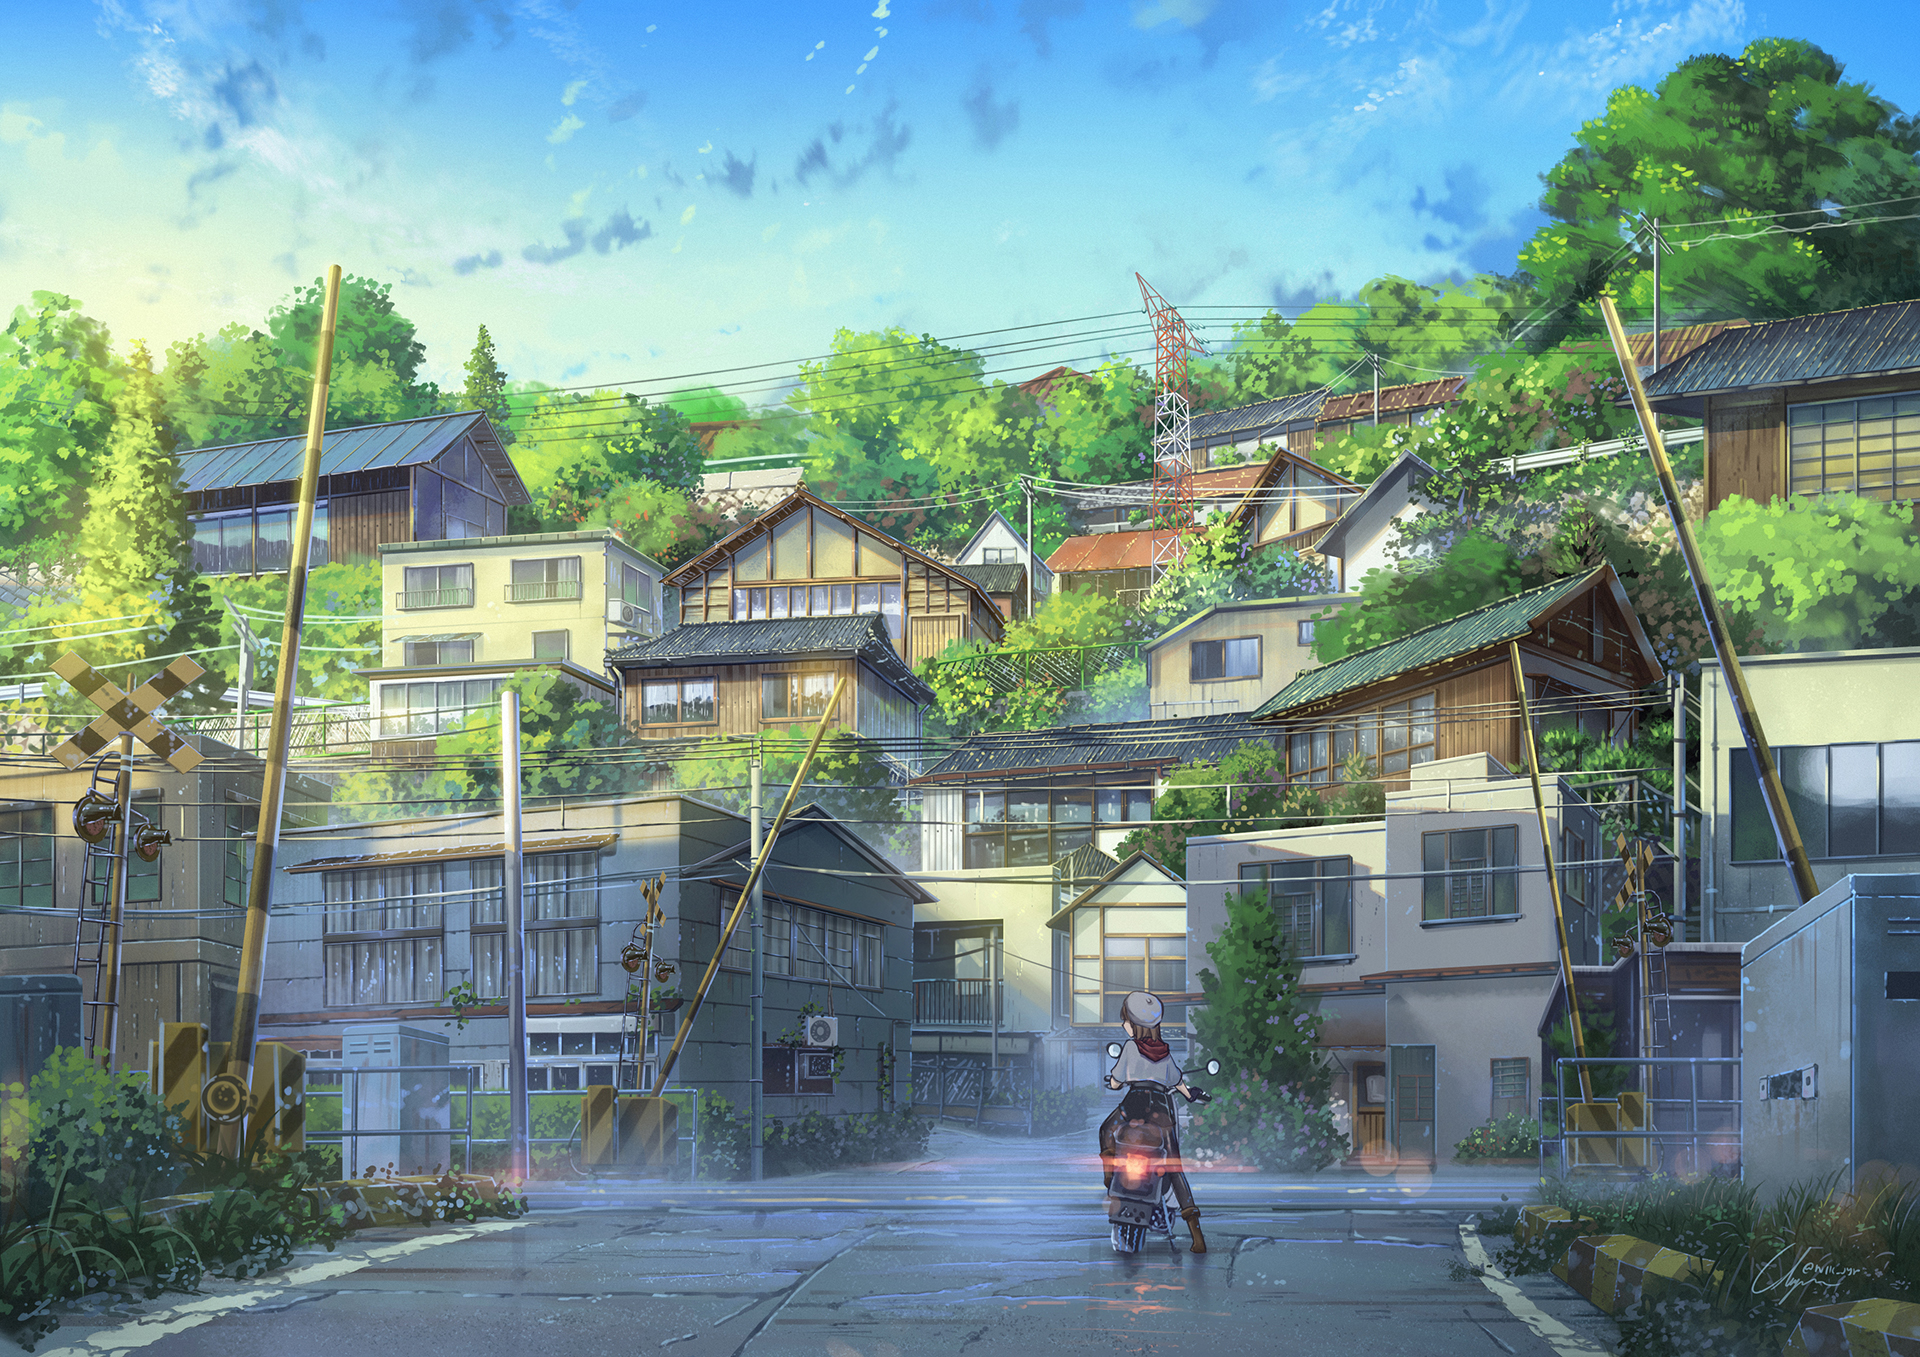 Japan Anime Vehicle Street Power Lines Town Anime Girls Women With Motorcycles Urban Motorcycle Artw 1920x1357